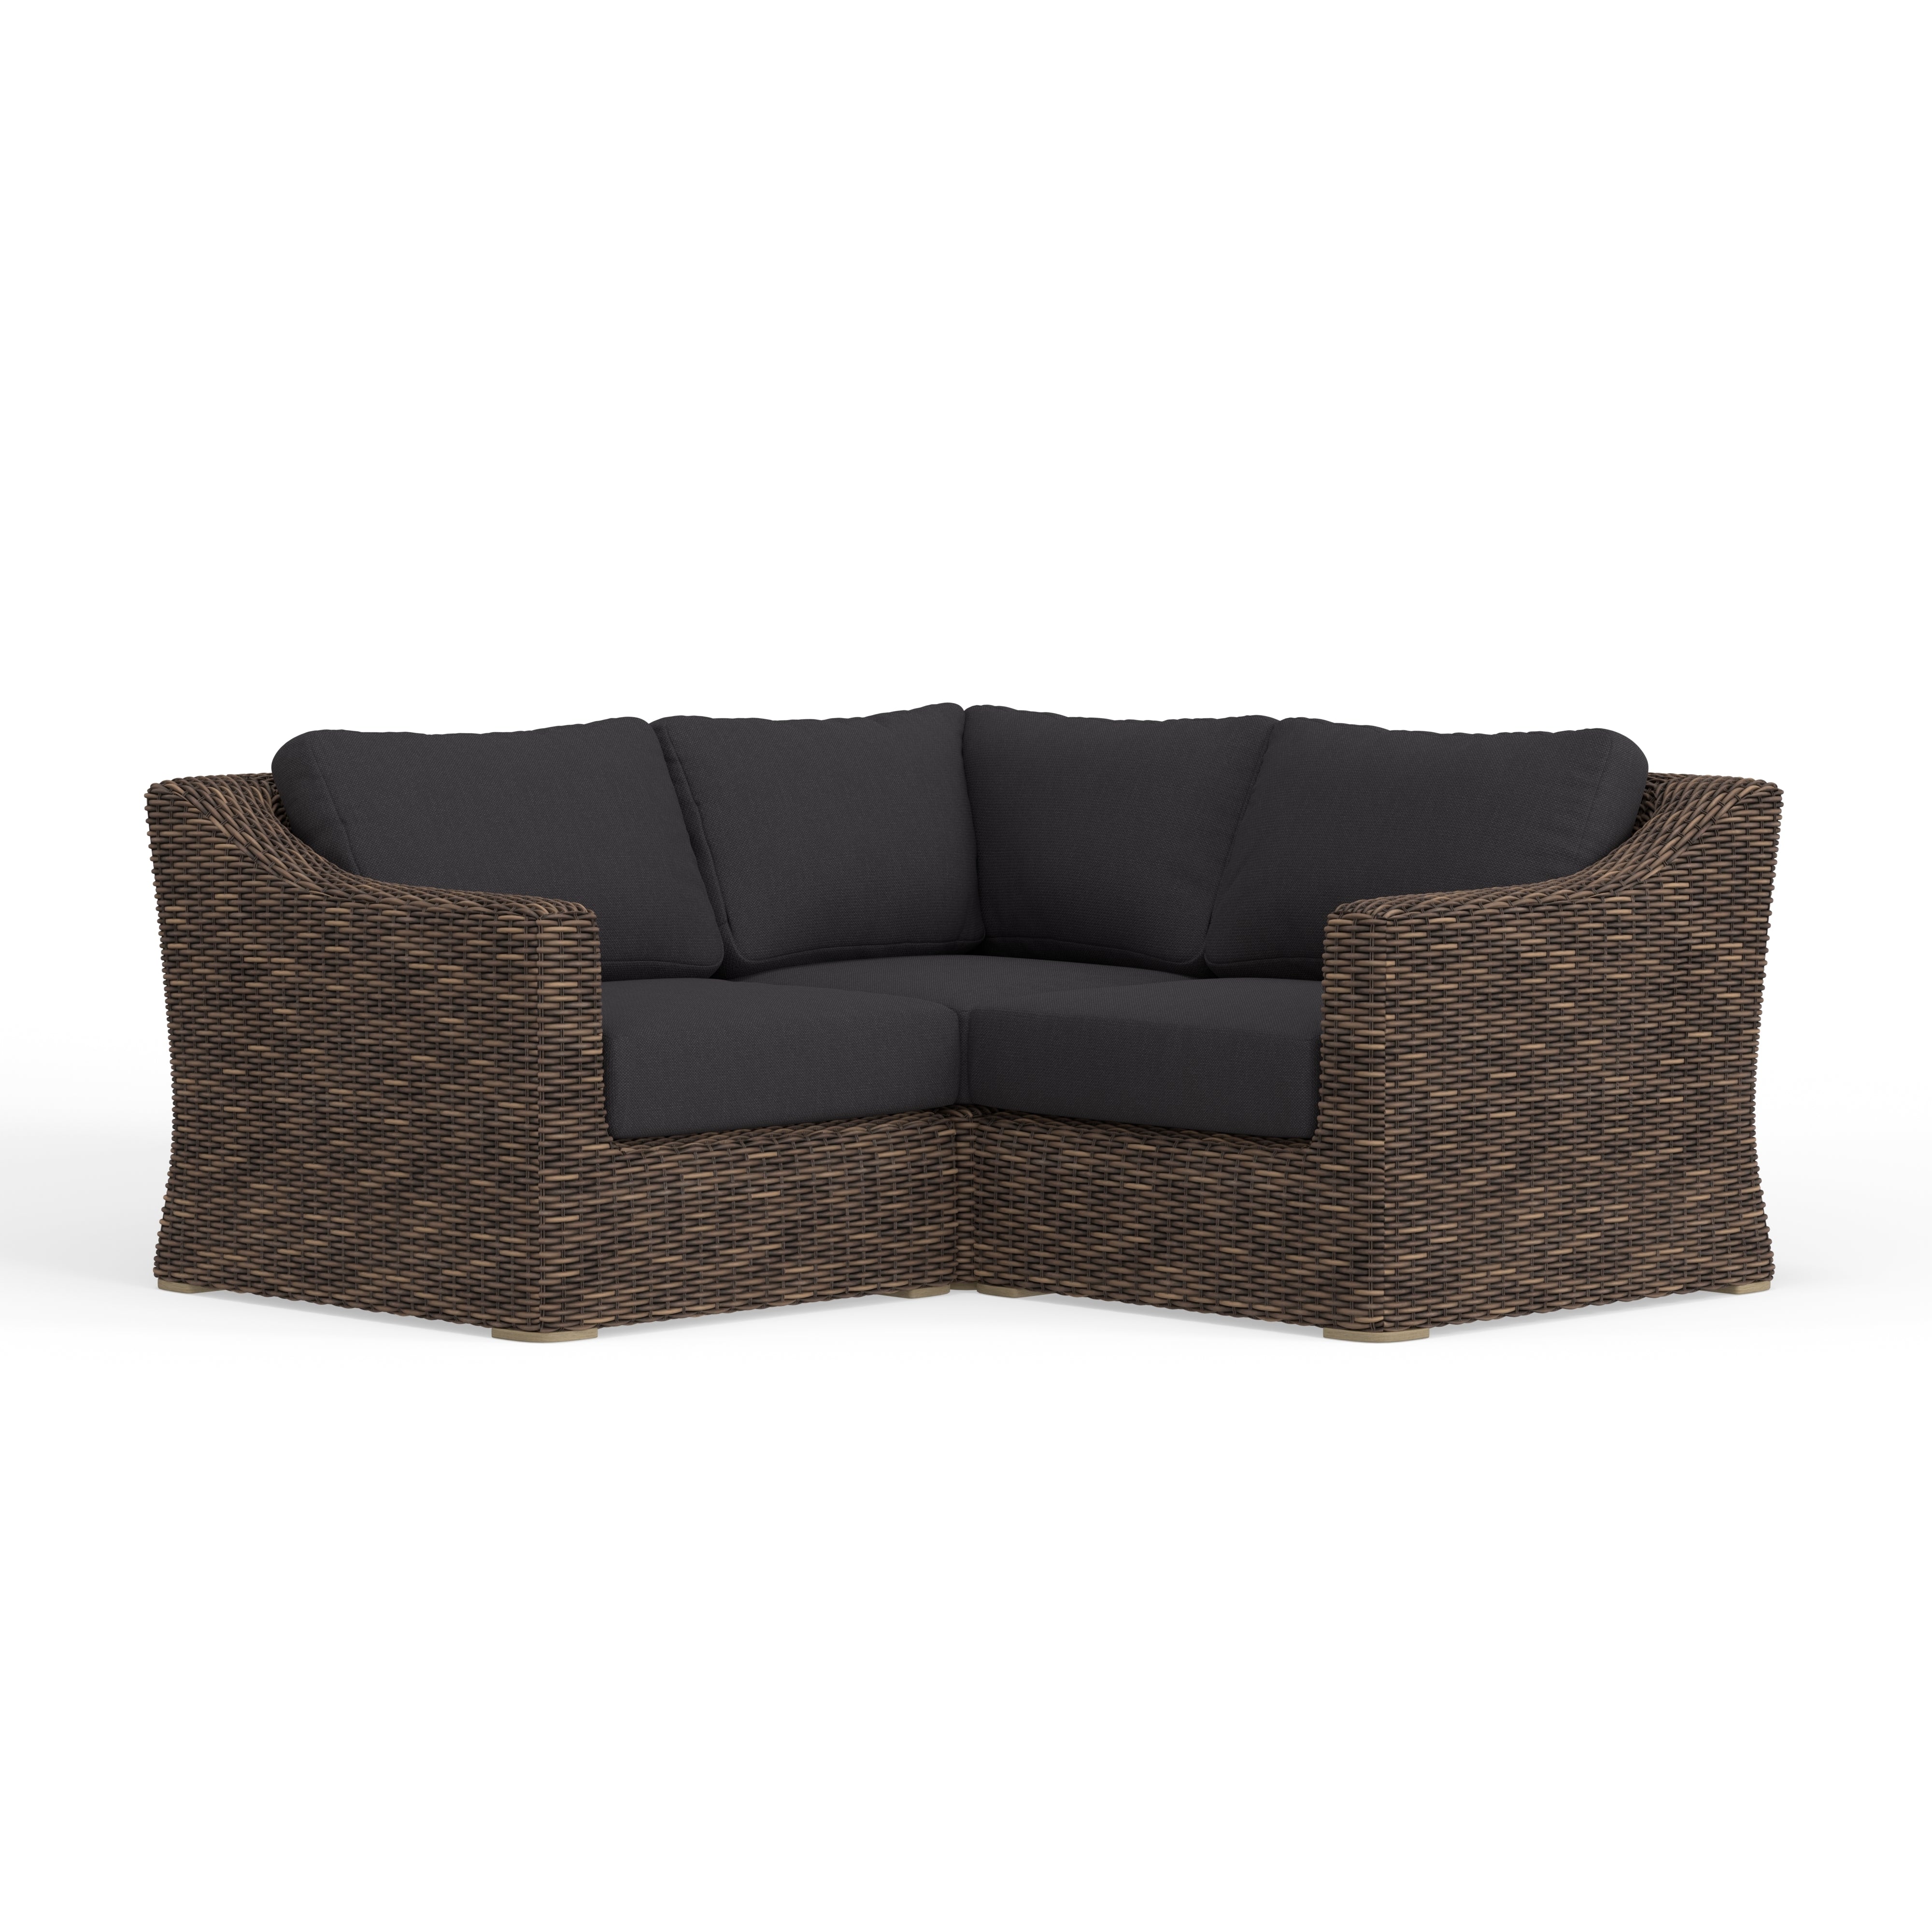 Wicker Sectional With Sunbrella Cushions